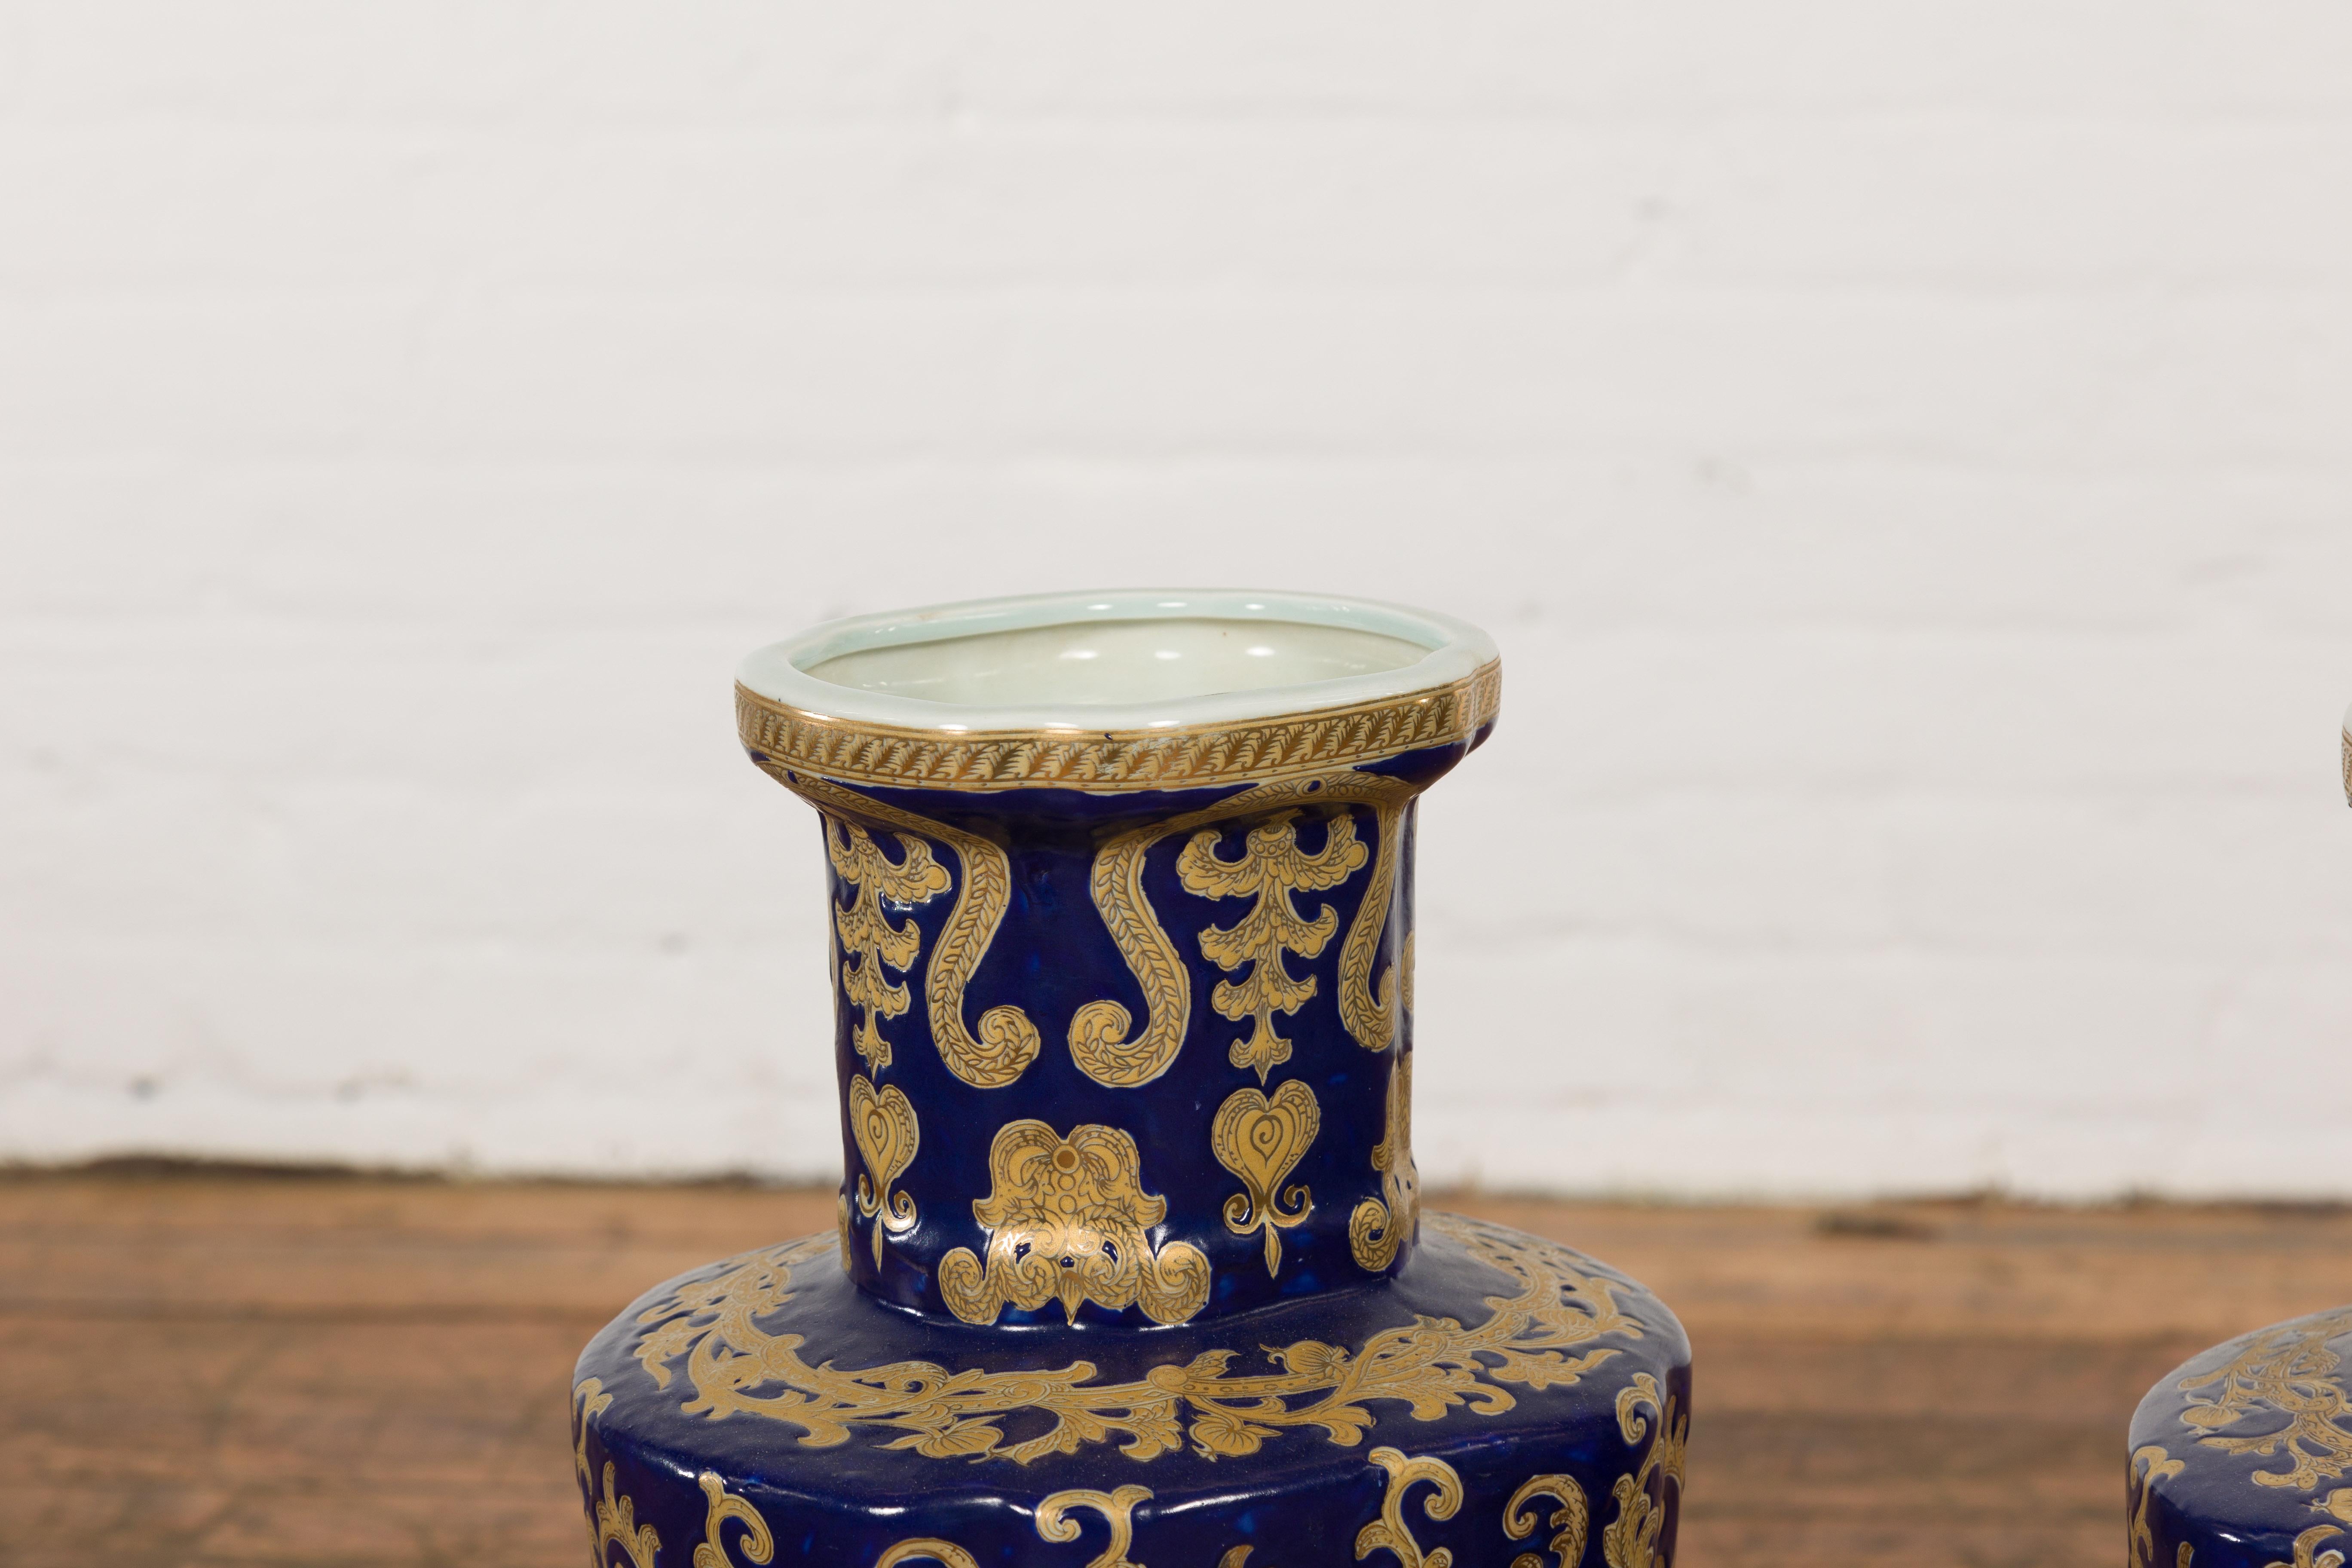 Pair of Dark Blue and Gold Vintage Vases with Intricate Design In Good Condition For Sale In Yonkers, NY